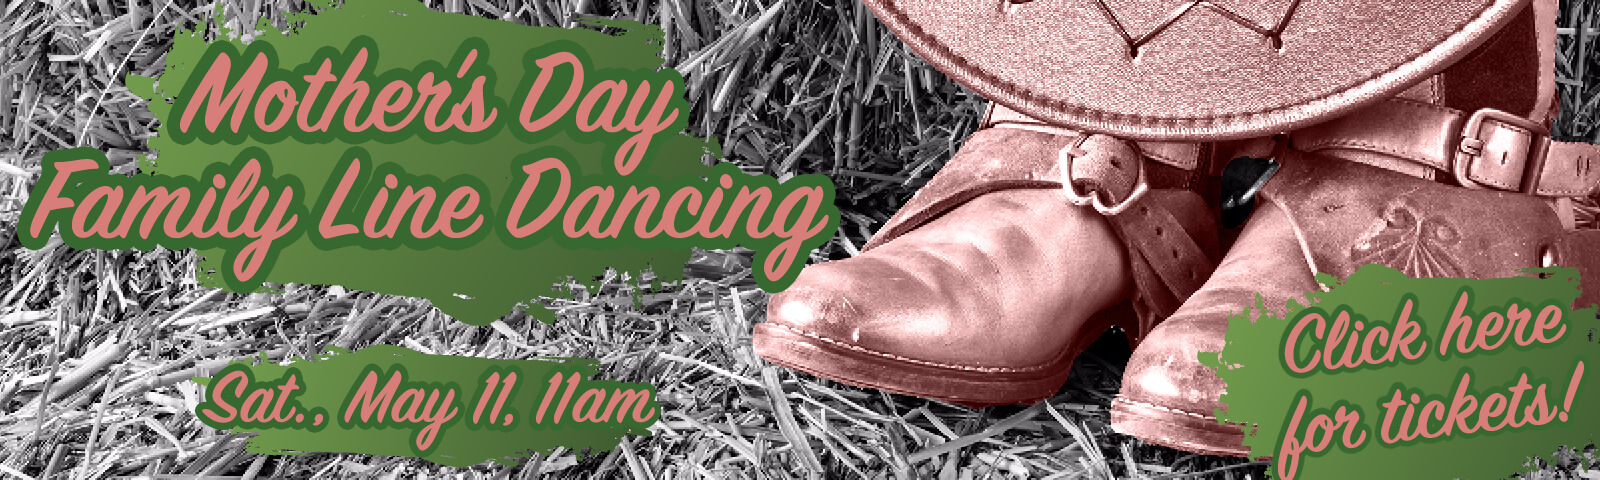 Mother's Day Family Line Dancing. Saturday, May 11, 11am. Click here for tickets!